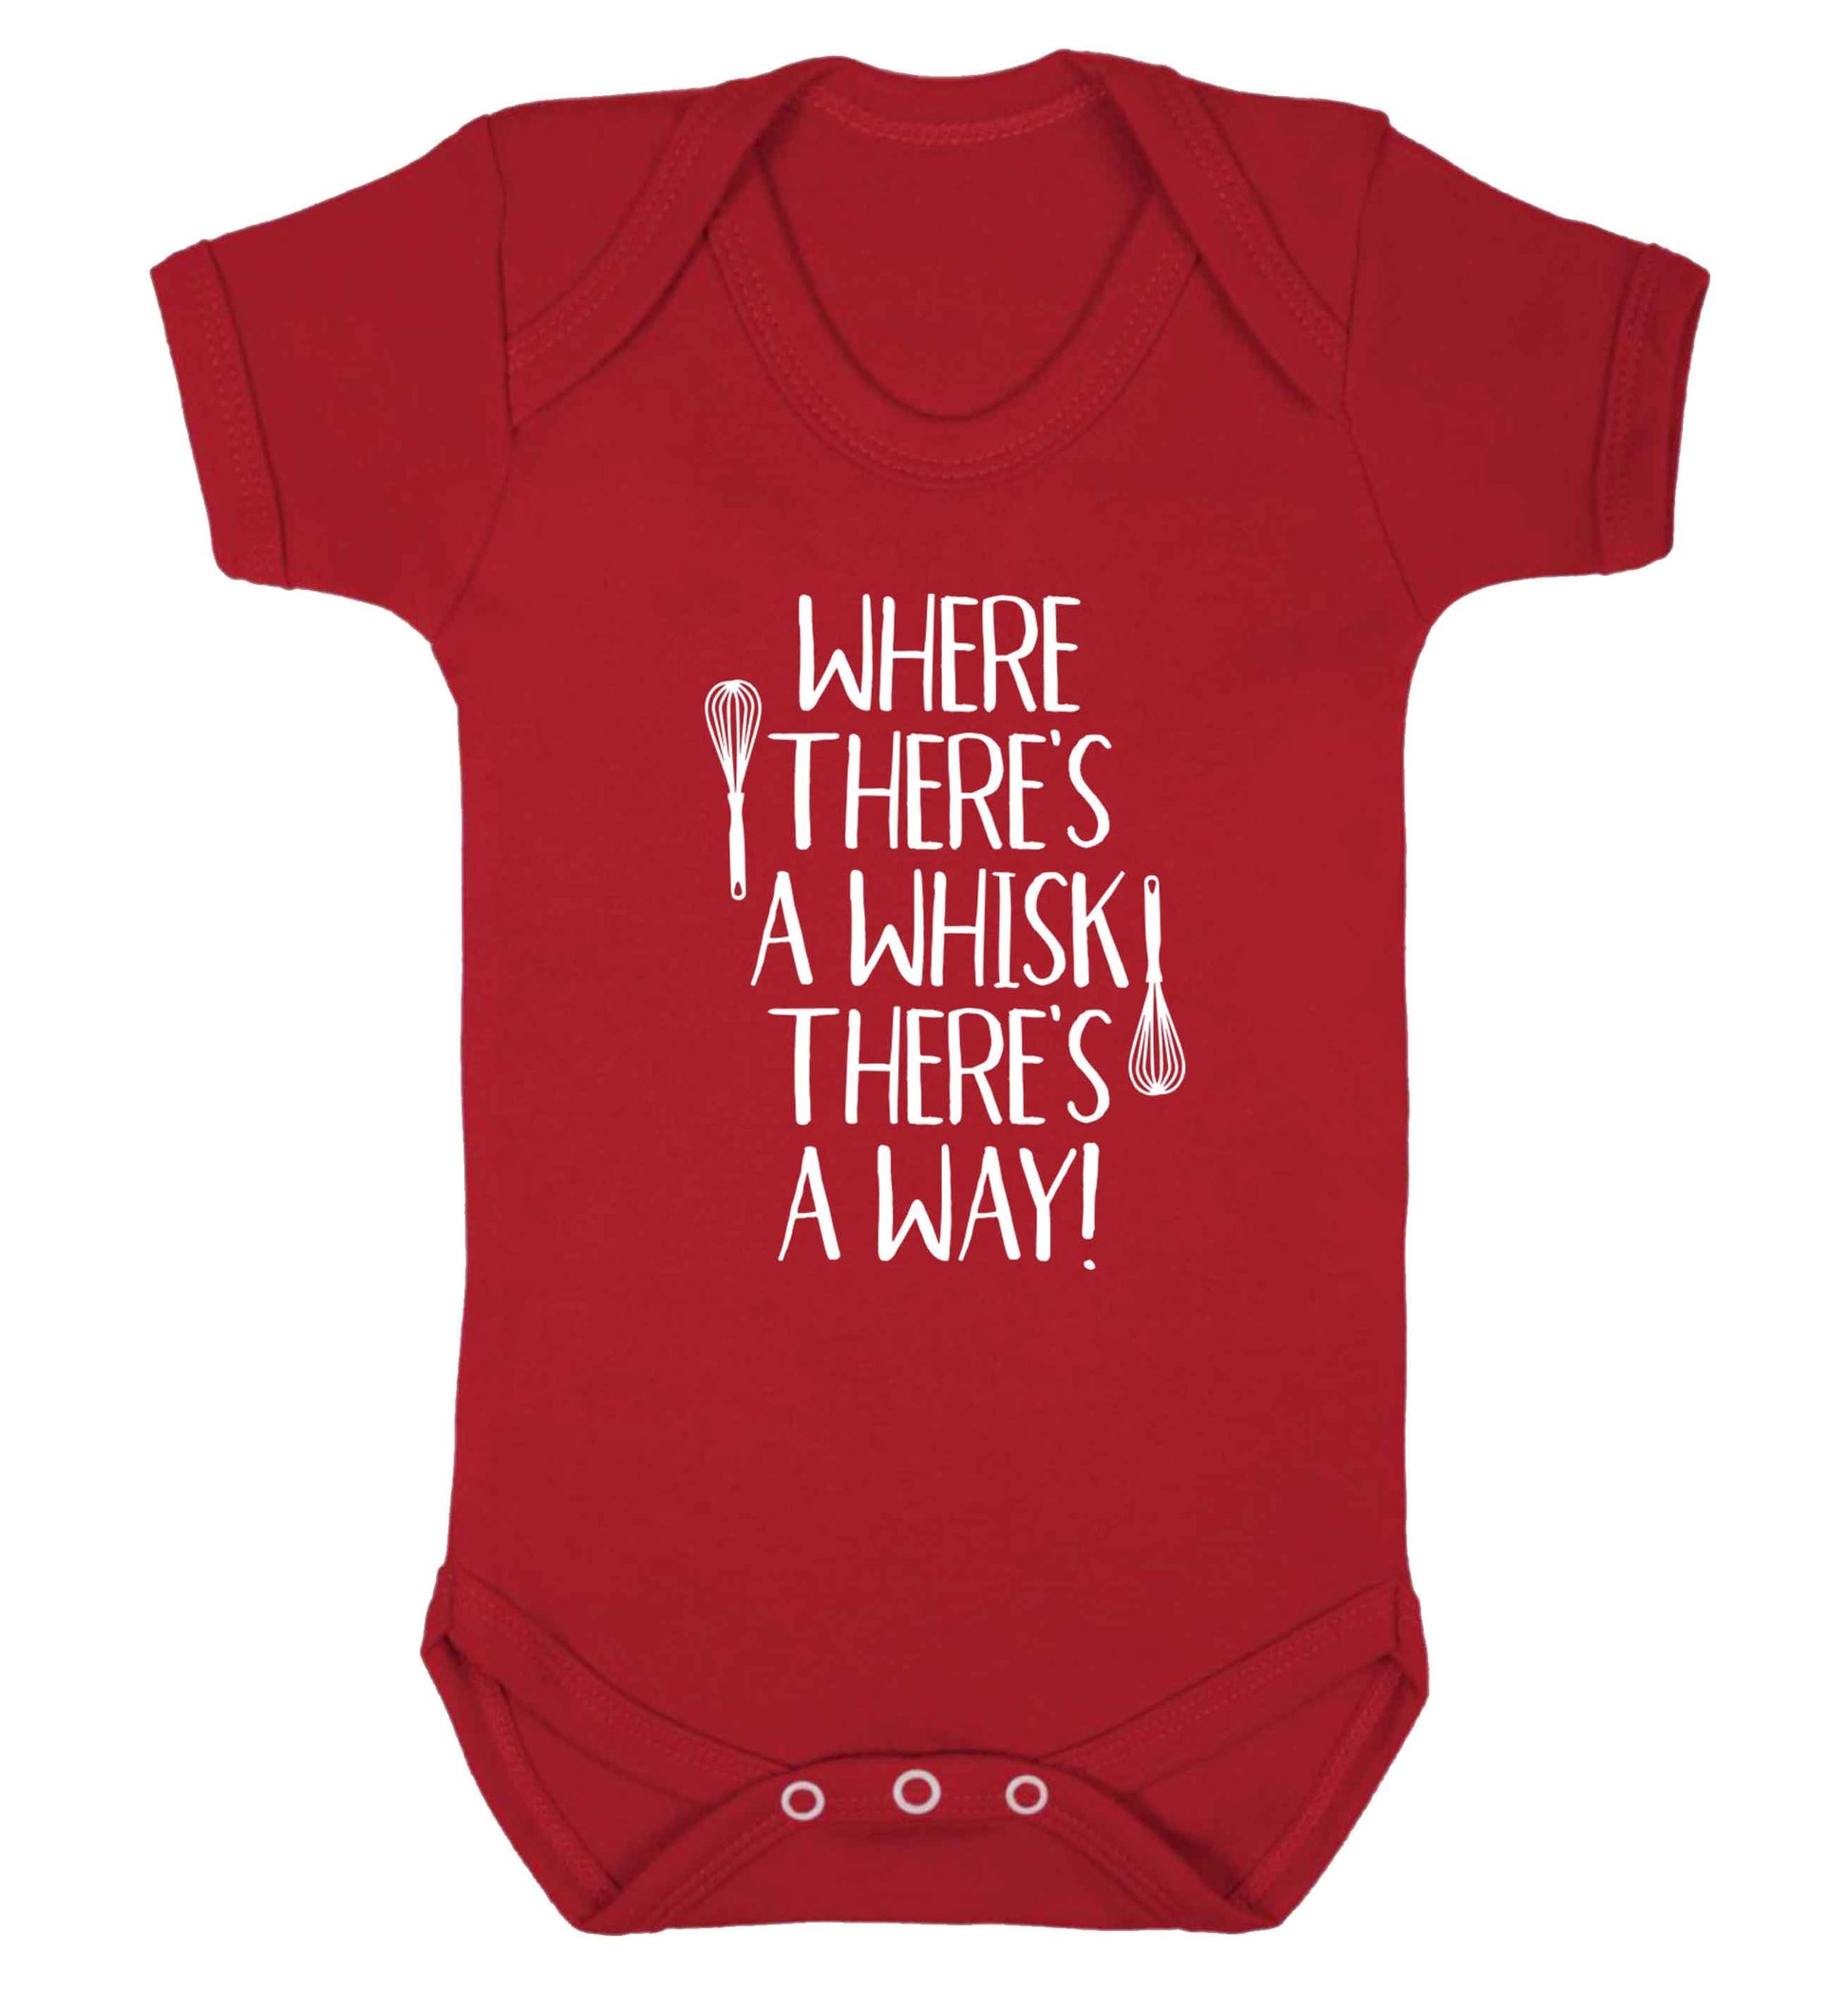 Where there's a whisk there's a way Baby Vest red 18-24 months